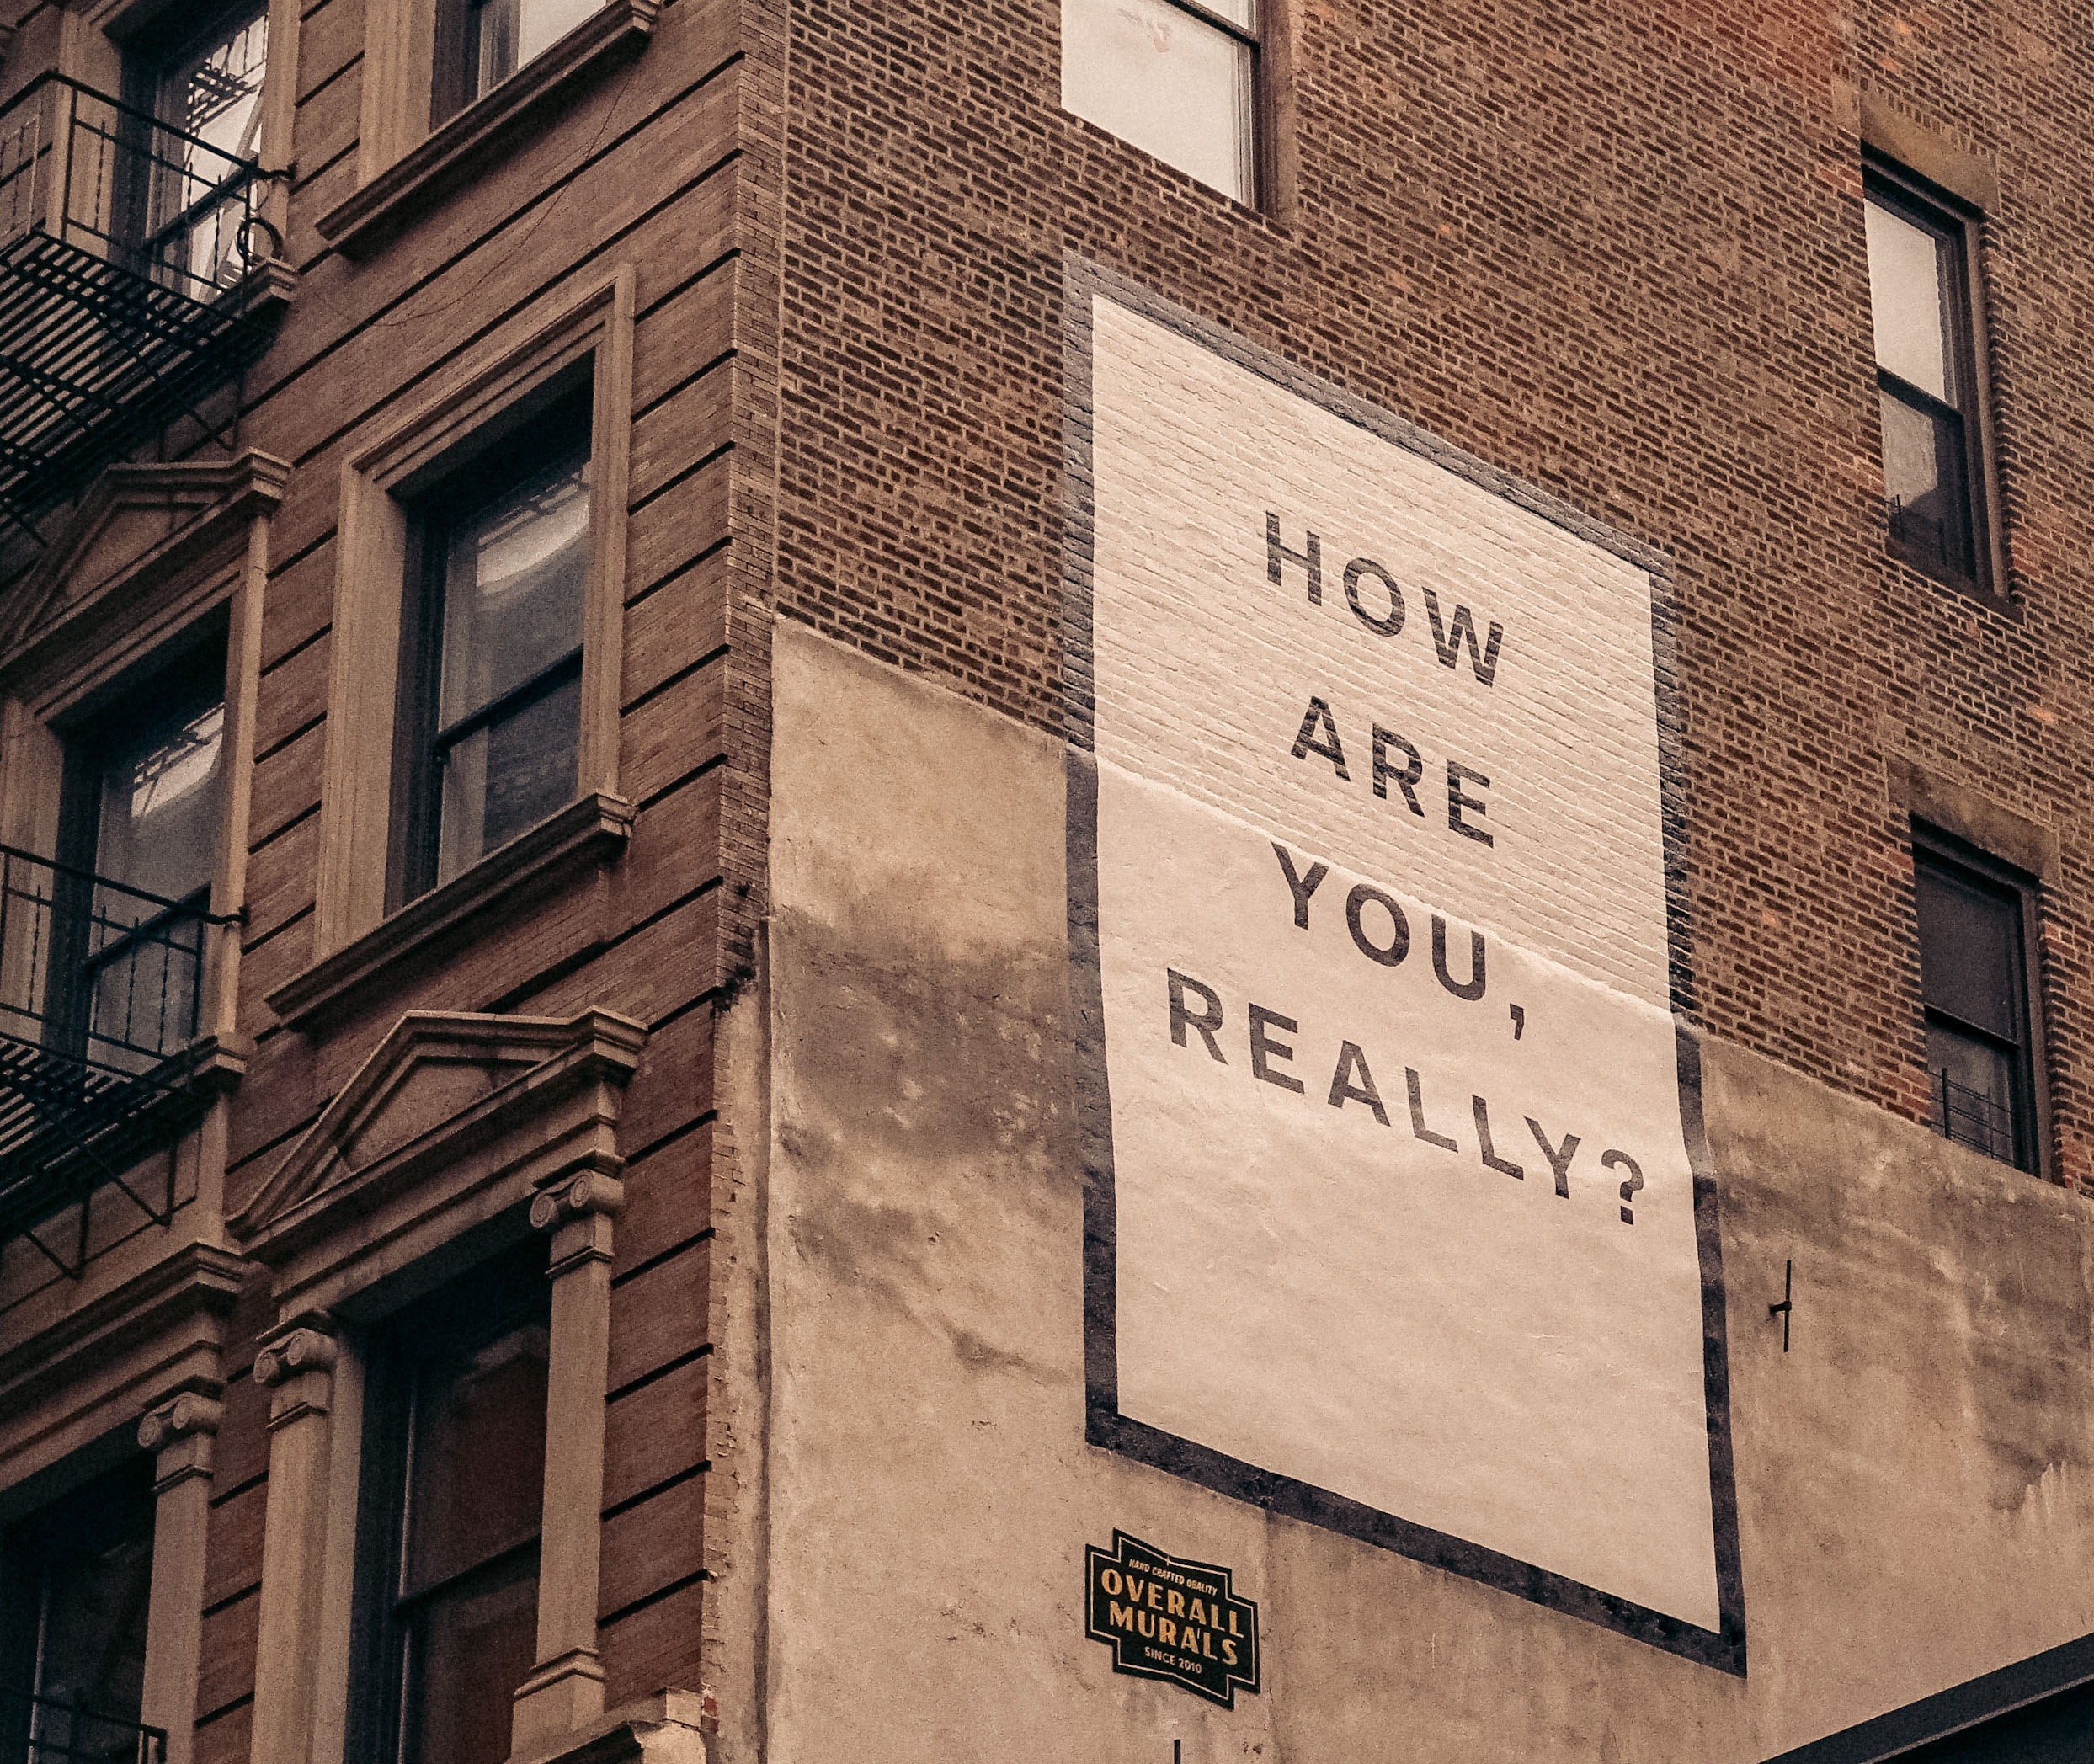 We can see the side of a building which features a sign saying "How are you really?" on it